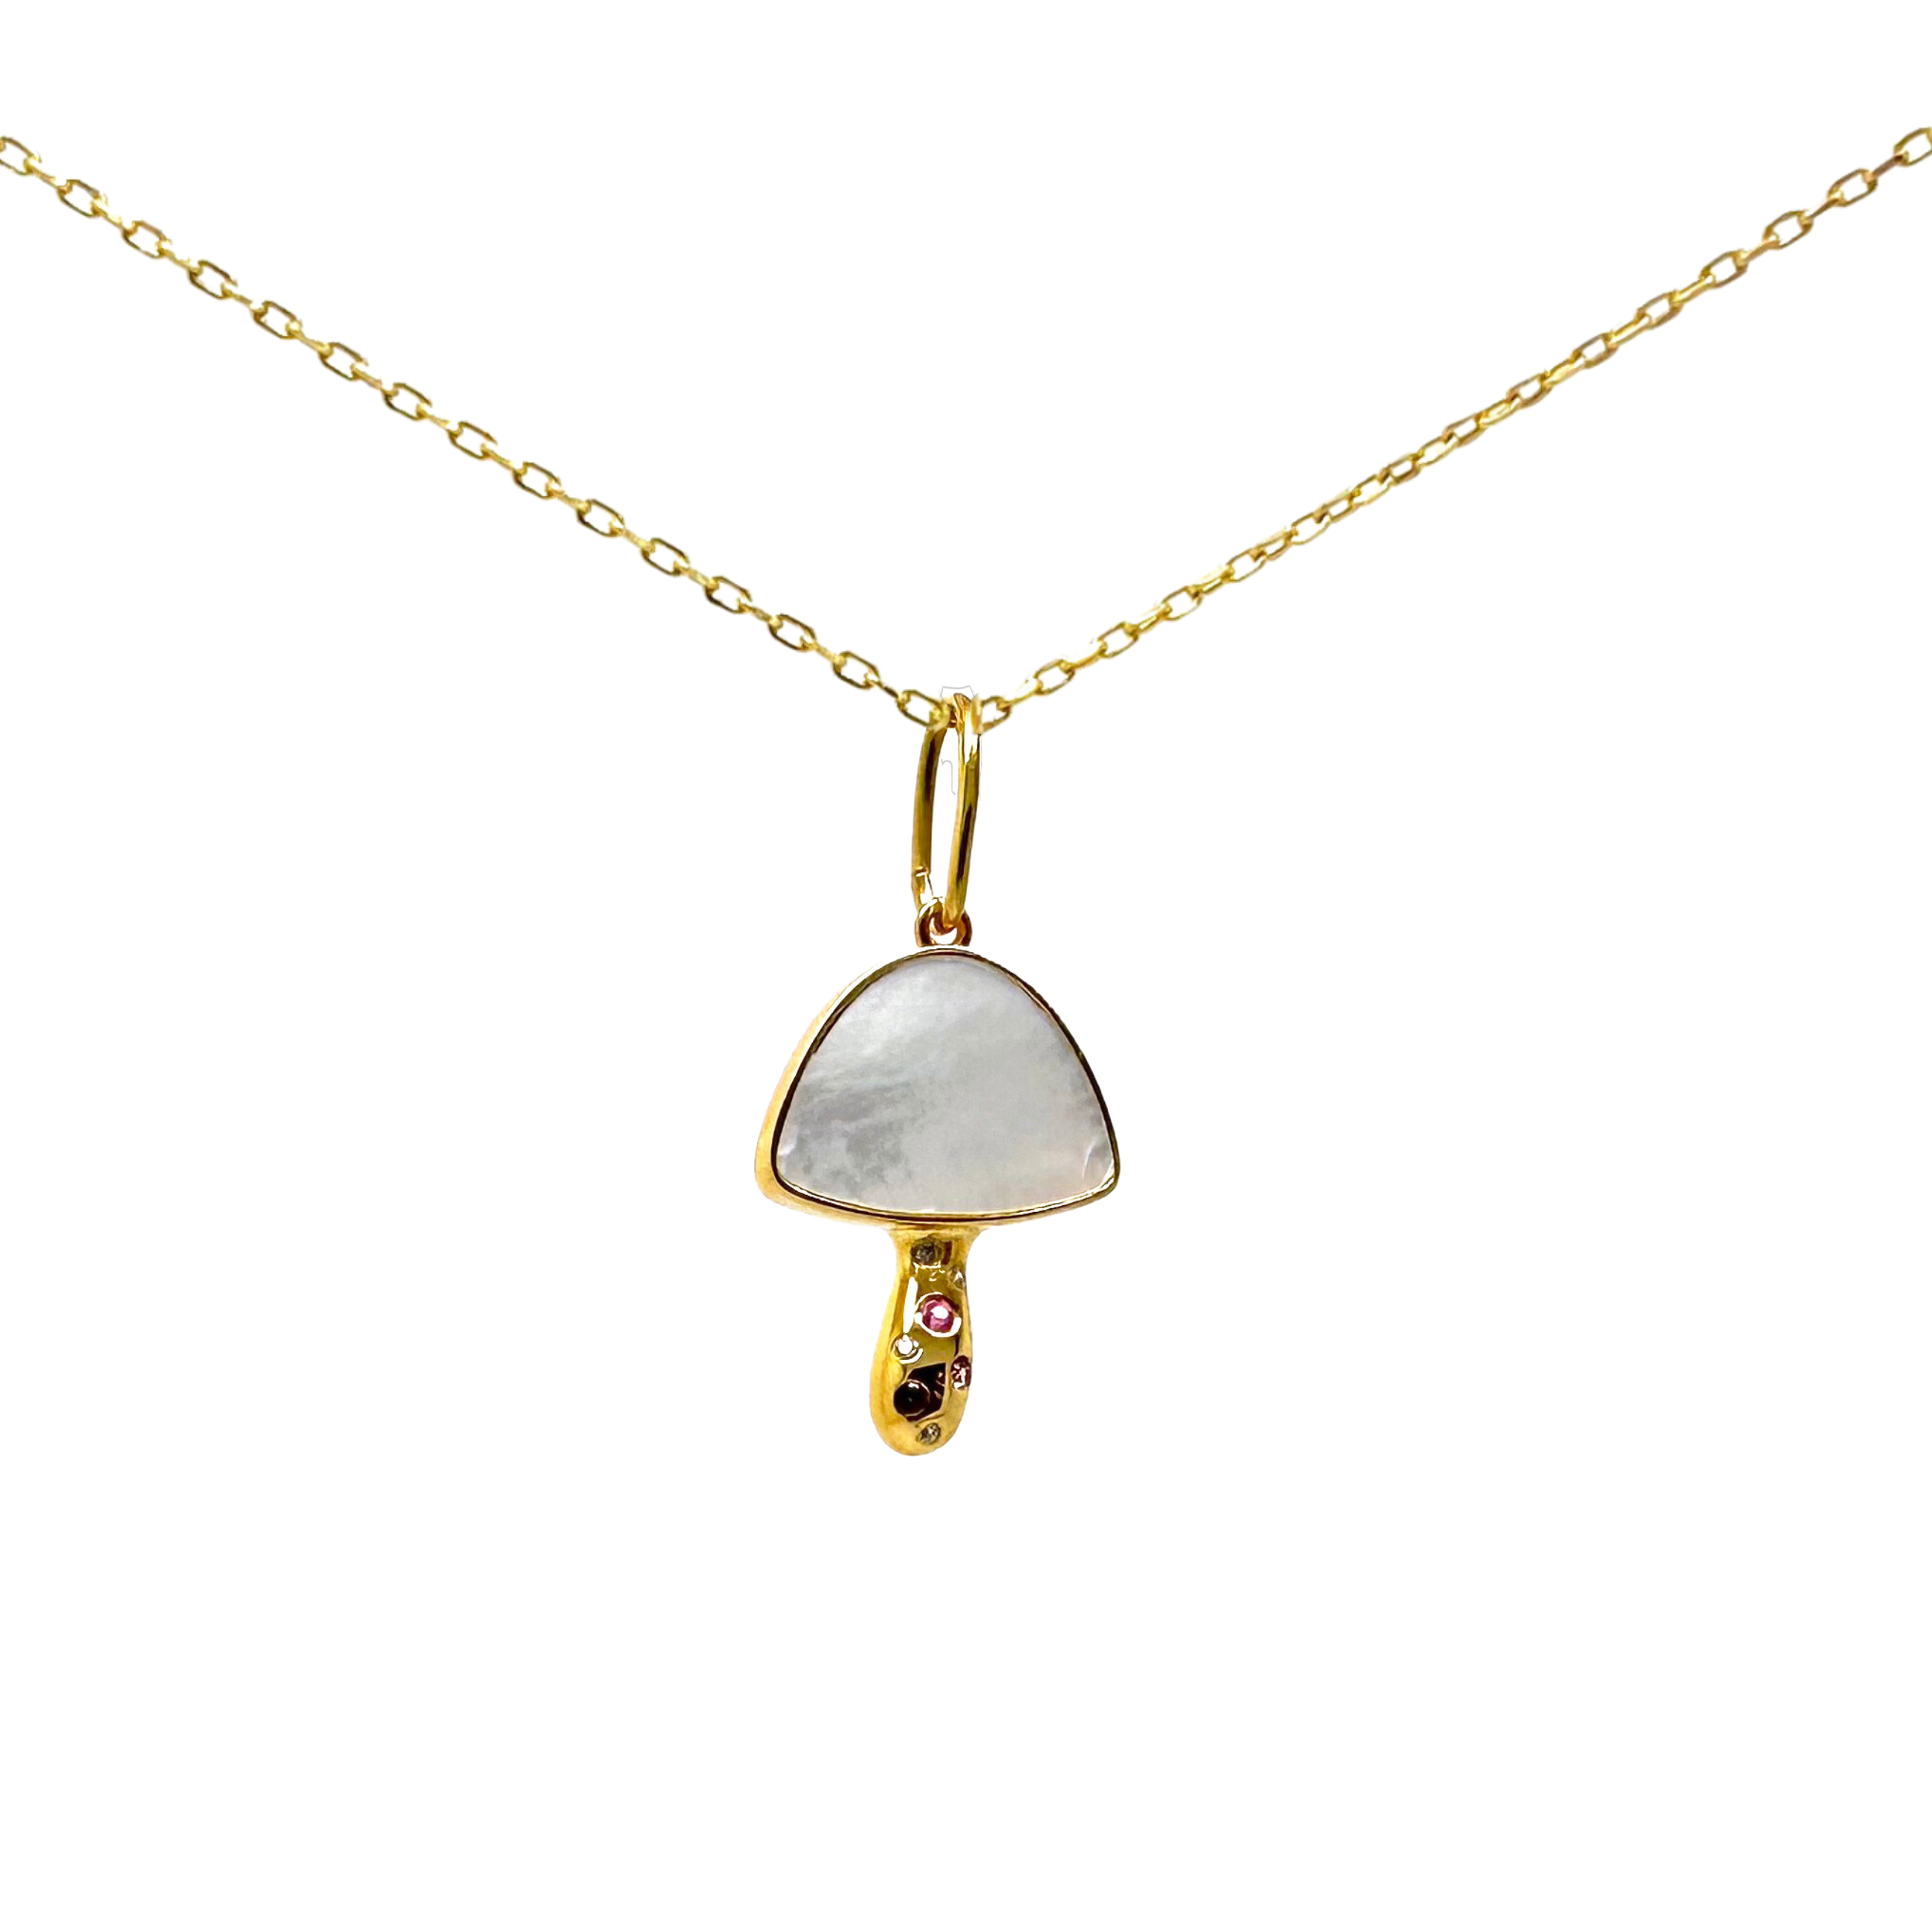 Mother of pearl Mushroom Necklace